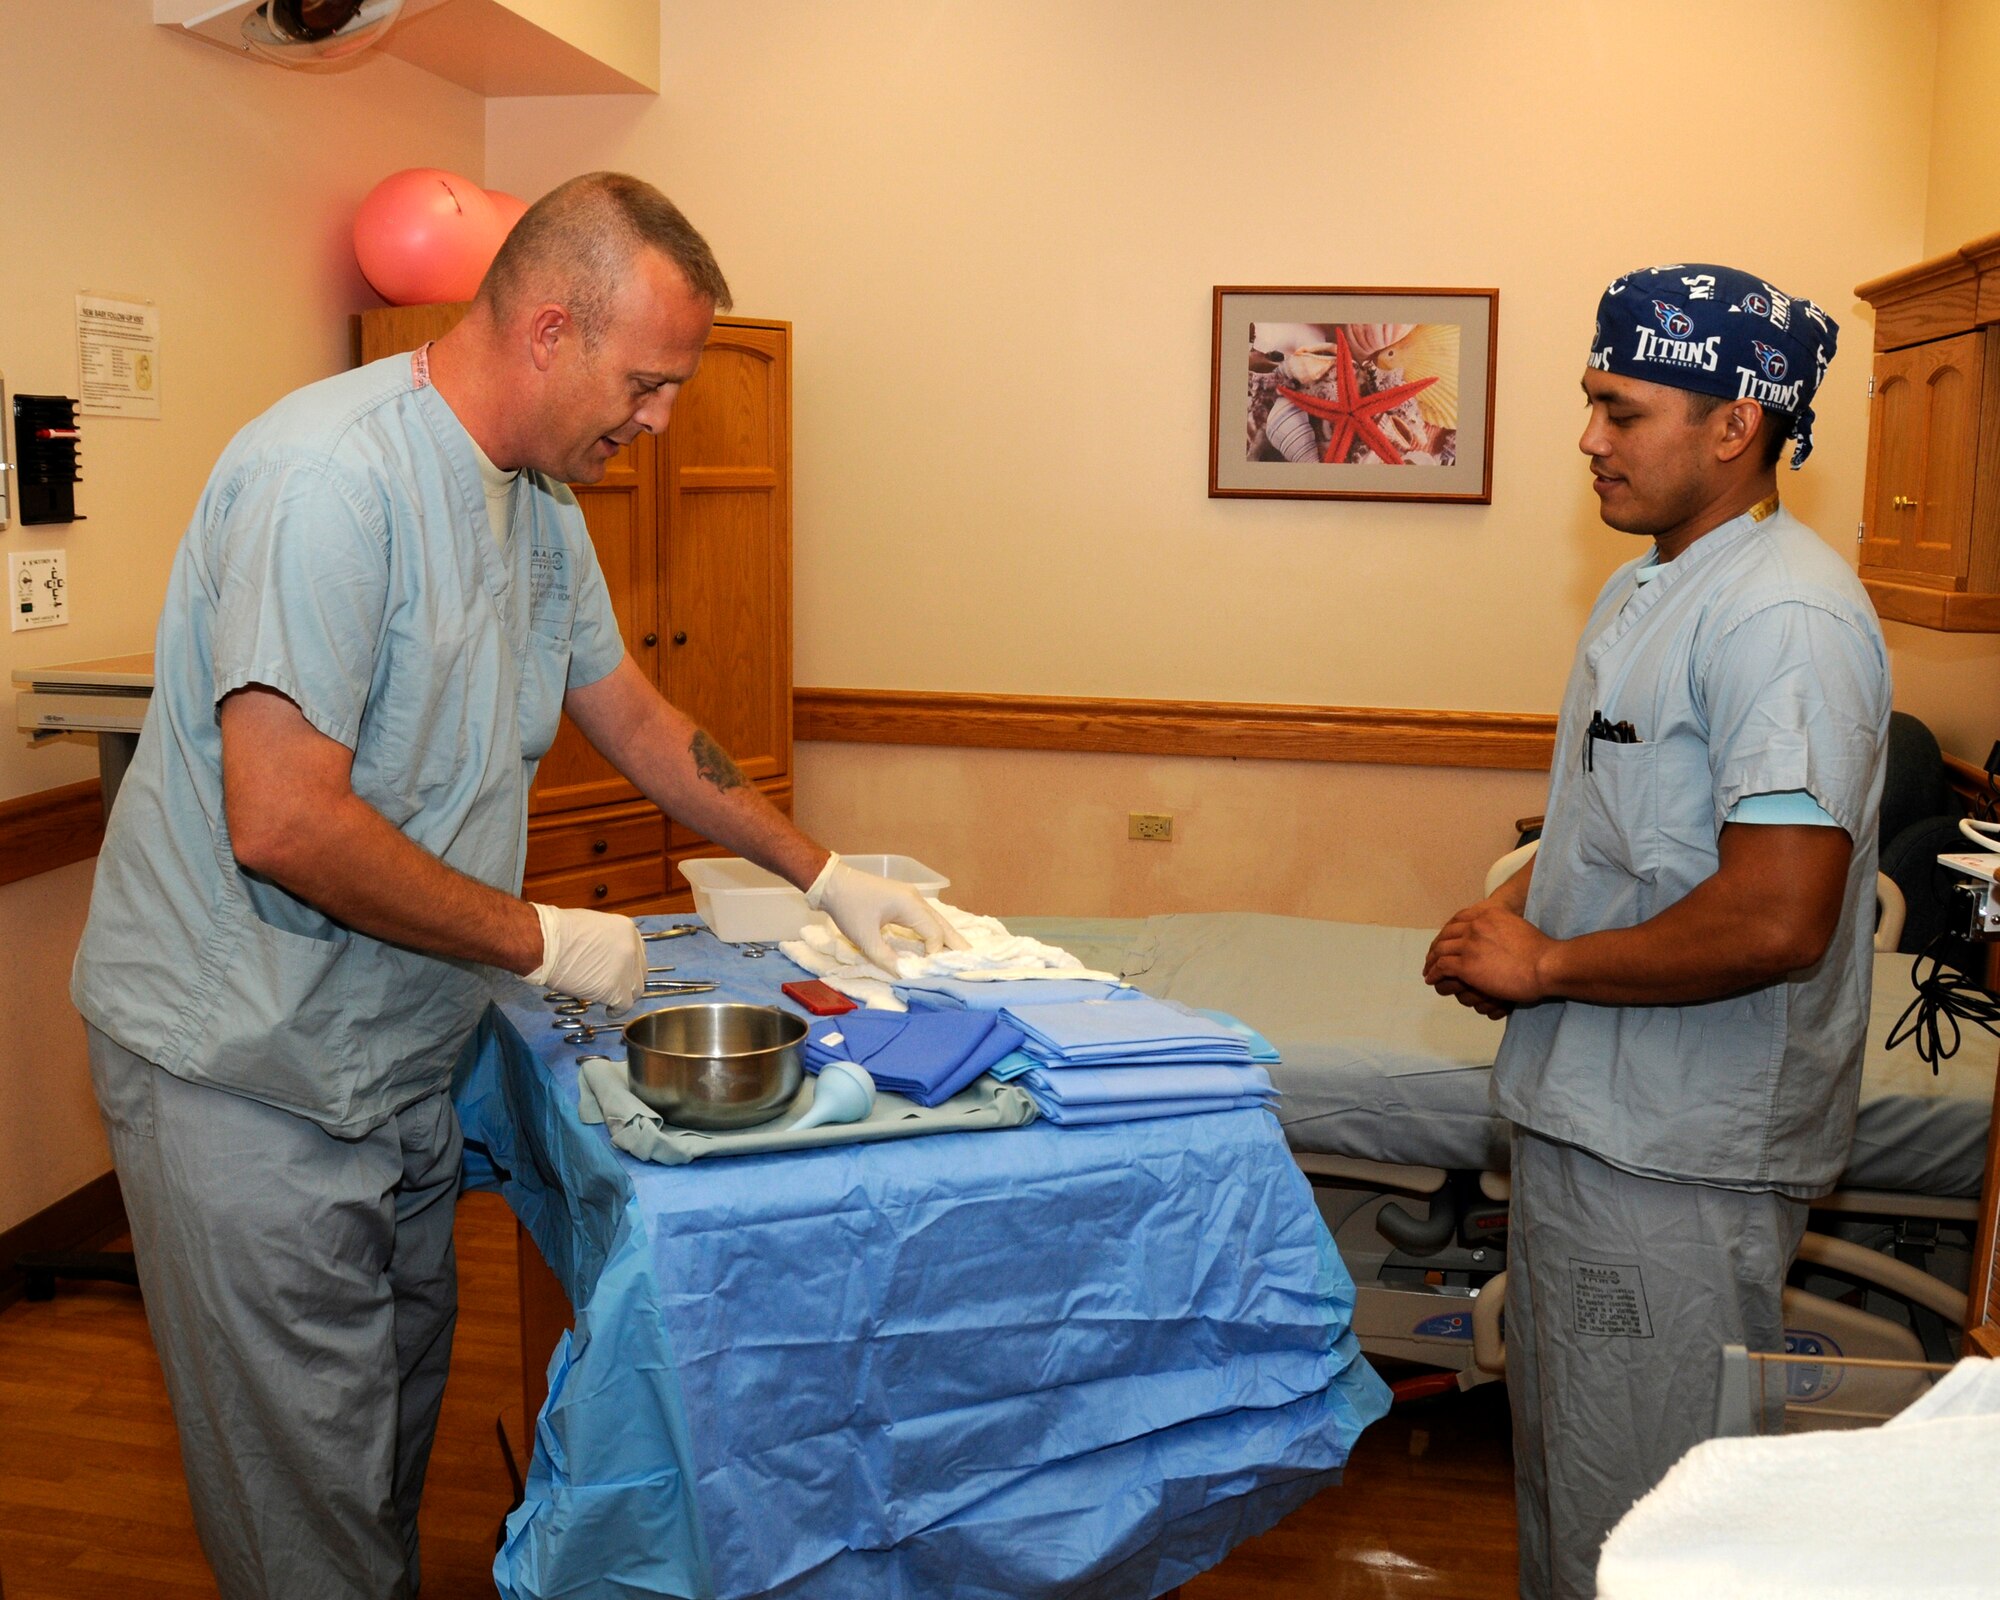 U.S. Air Force Tech. Sgt. Larry White (left), 182nd Medical Group, Peoria, Ill., works with Tripler Army Medical Center obstetrics scrub technician Christopher Mendoza to prepare the instruments used in a delivery room September 12, 2014. (U.S. Air National Guard photo by Tech. Sgt. Todd Pendleton) 